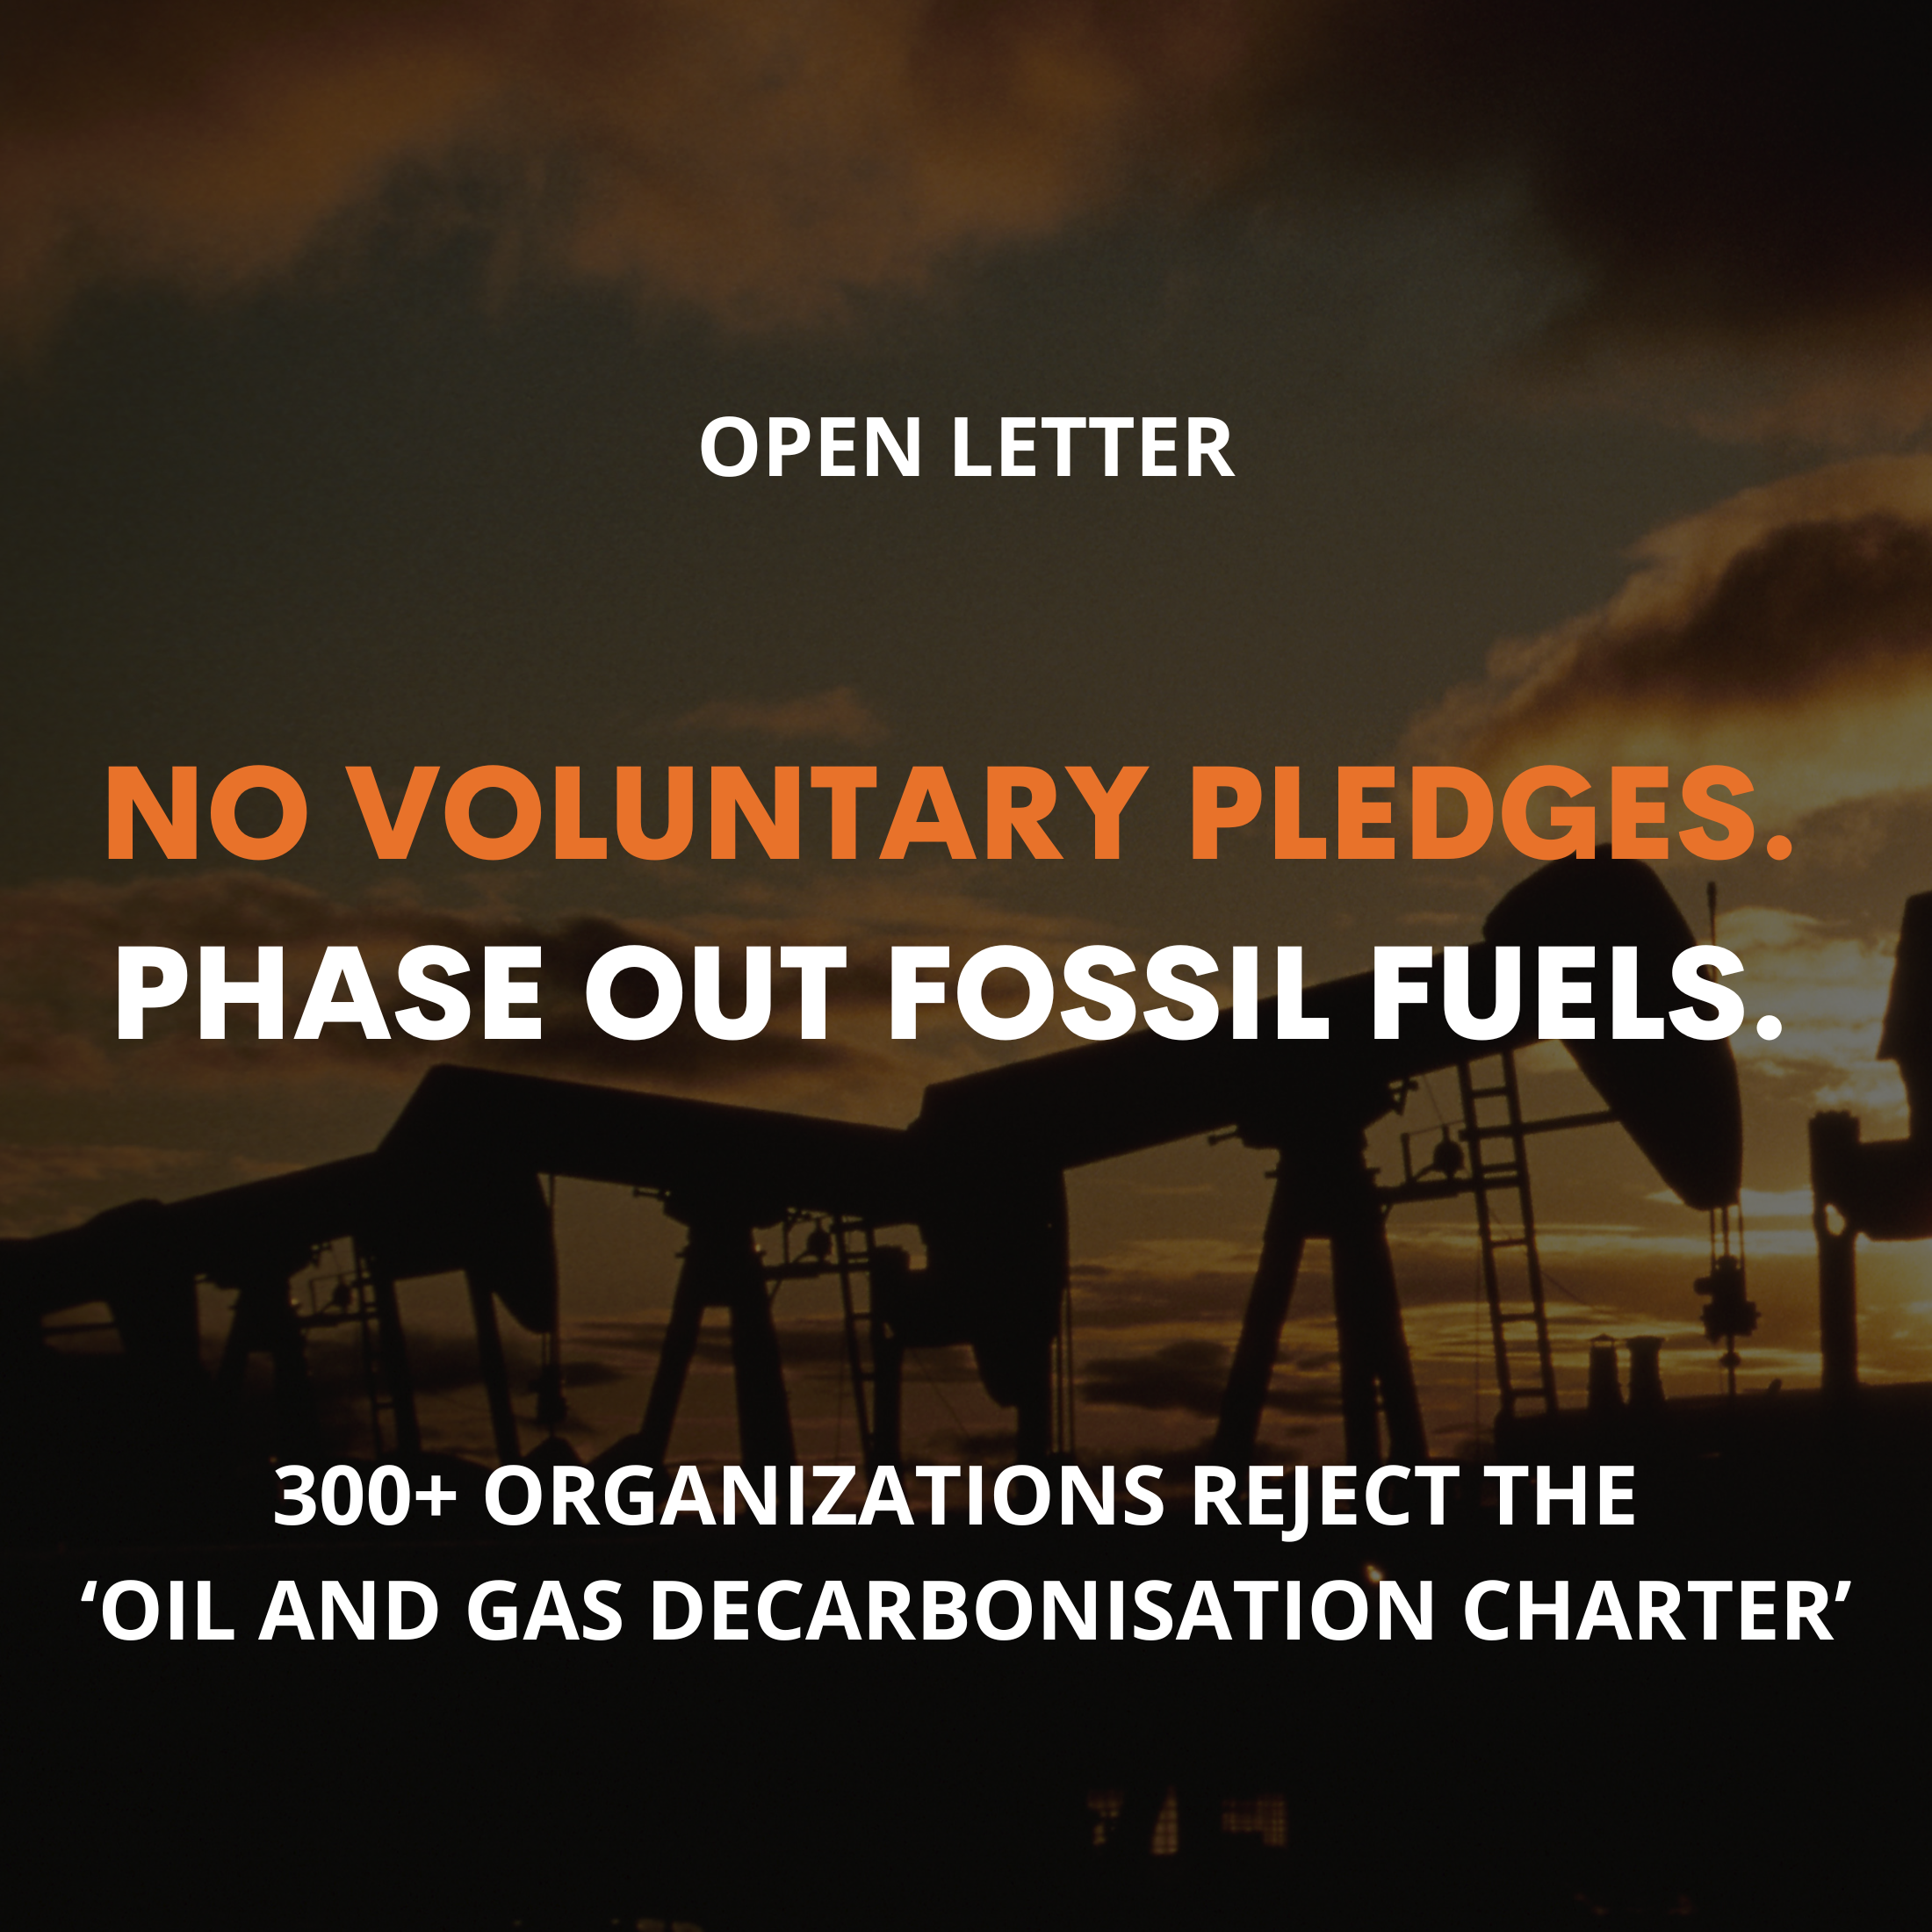 Open Letter: The World Needs A Transformational Outcome, Not More Voluntary Pledges